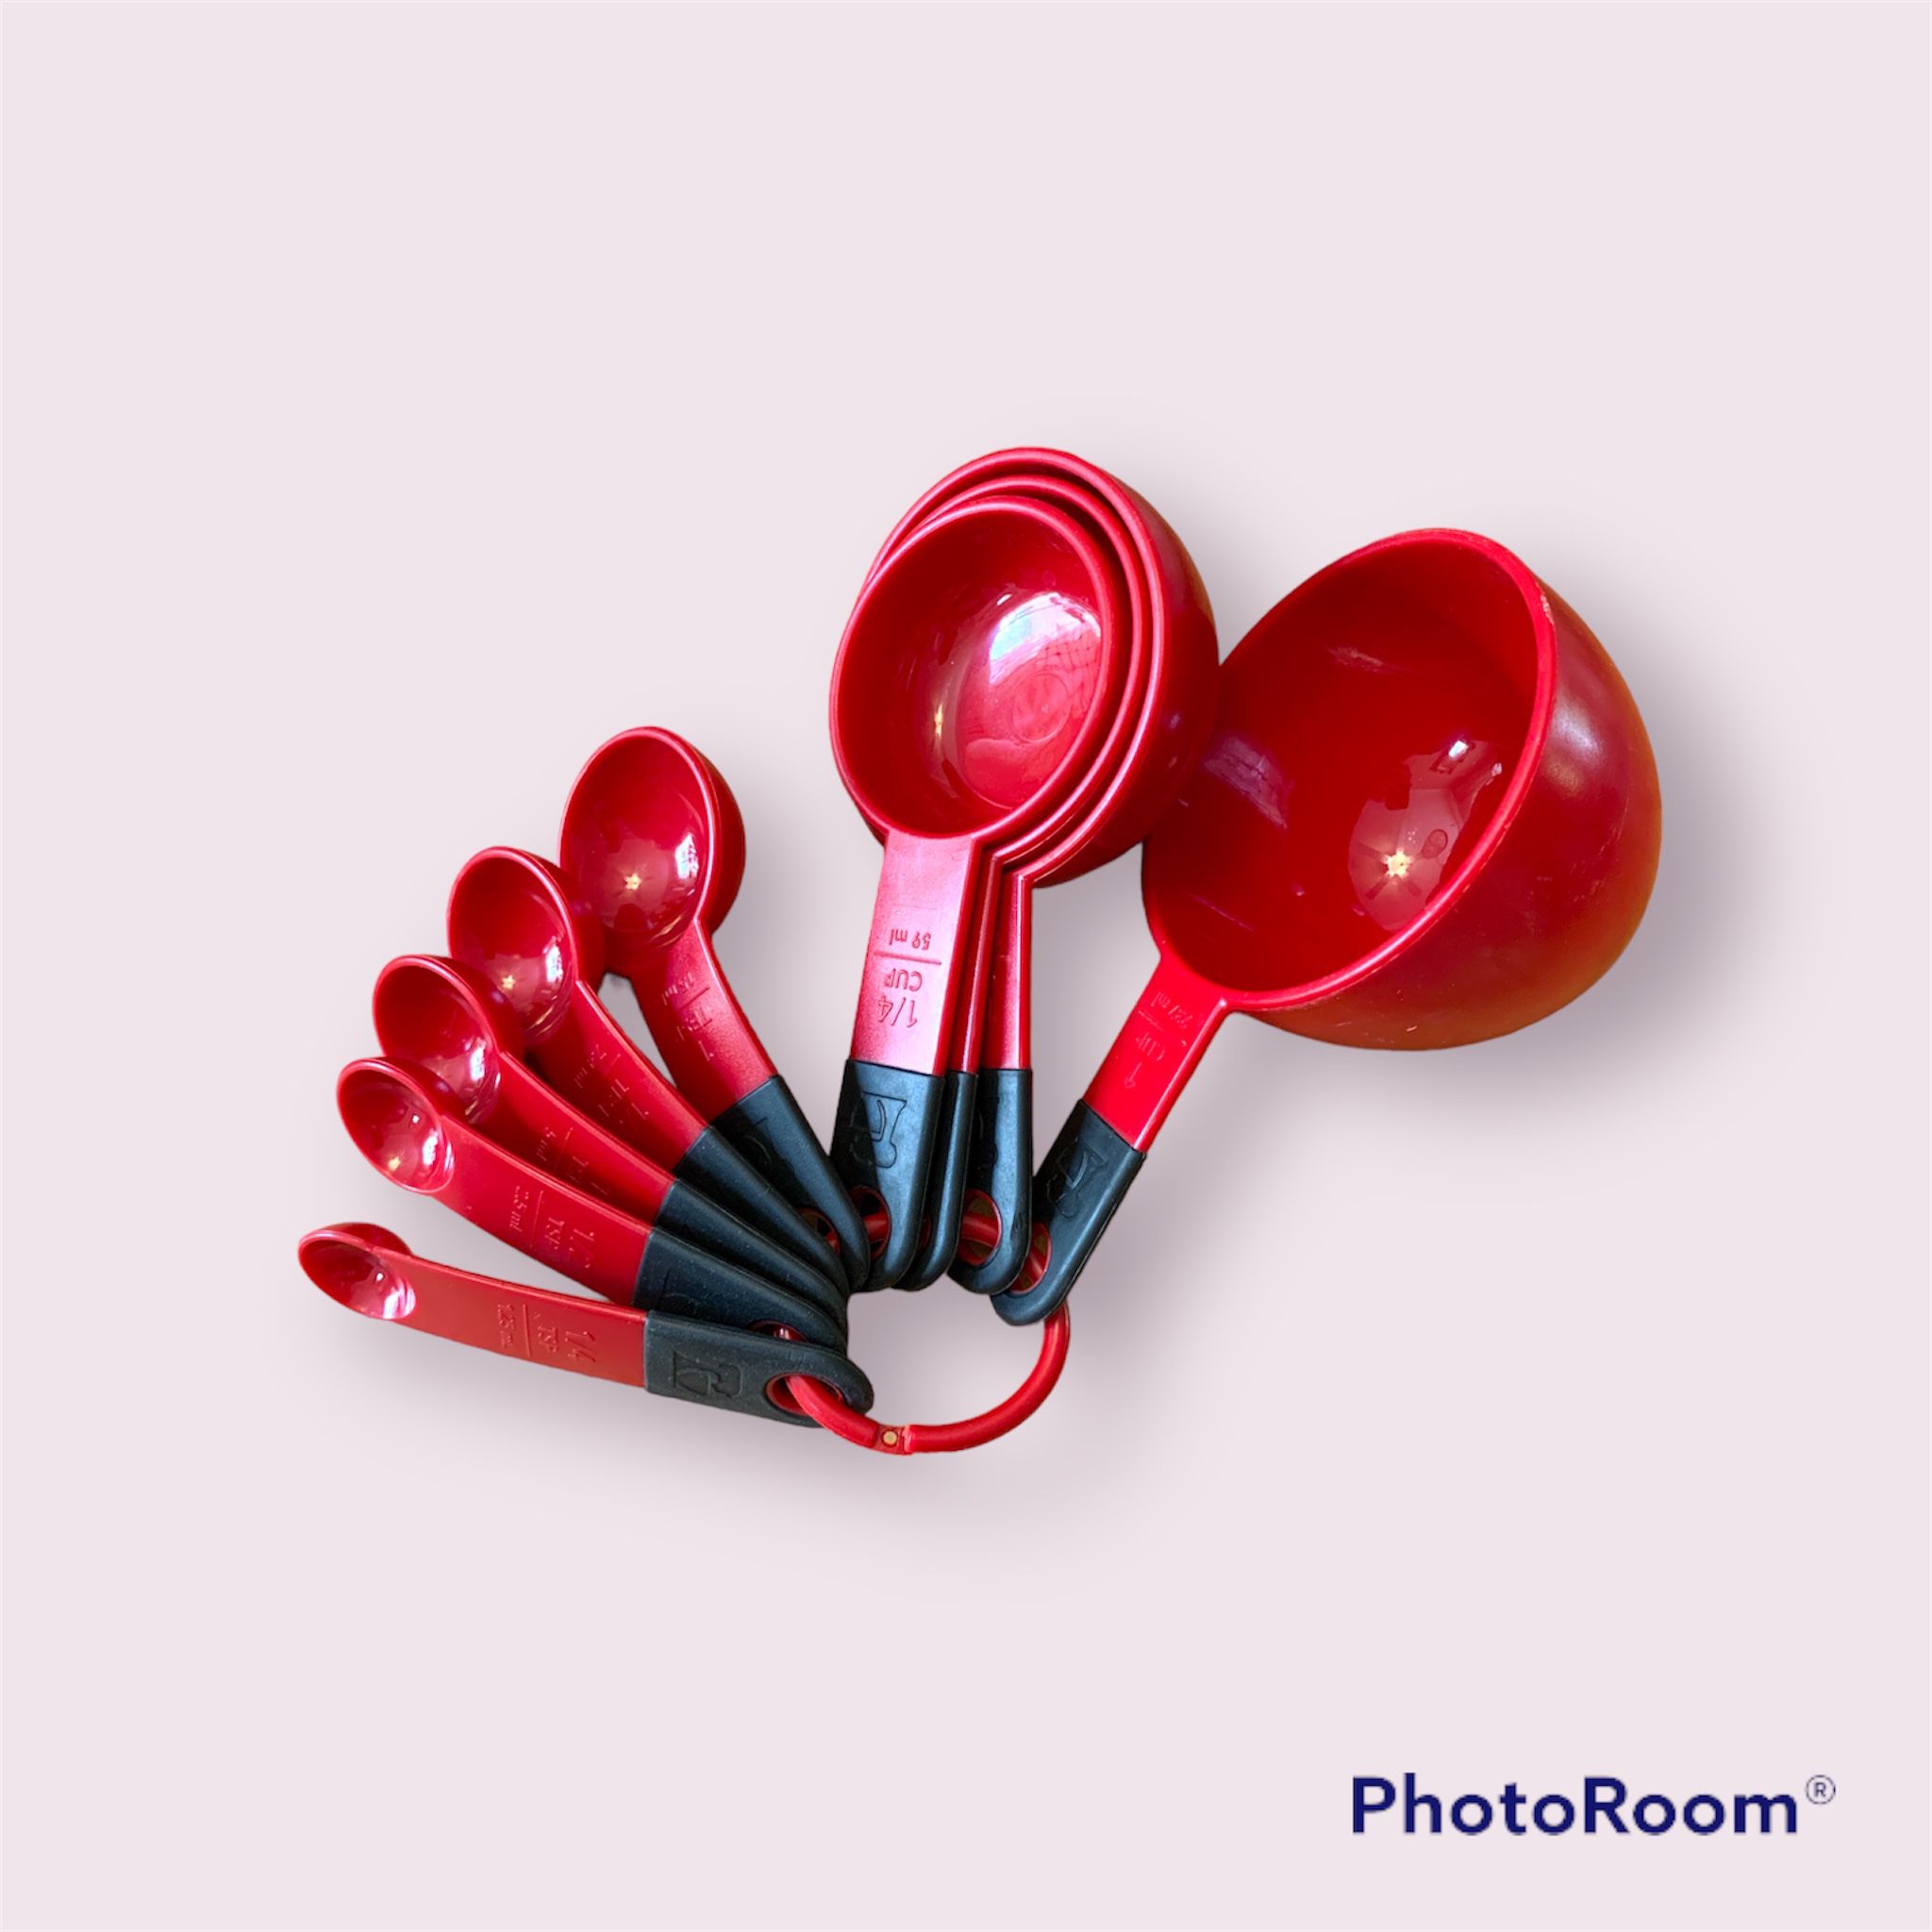 KitchenAid Measuring Cups & Spoons, Red